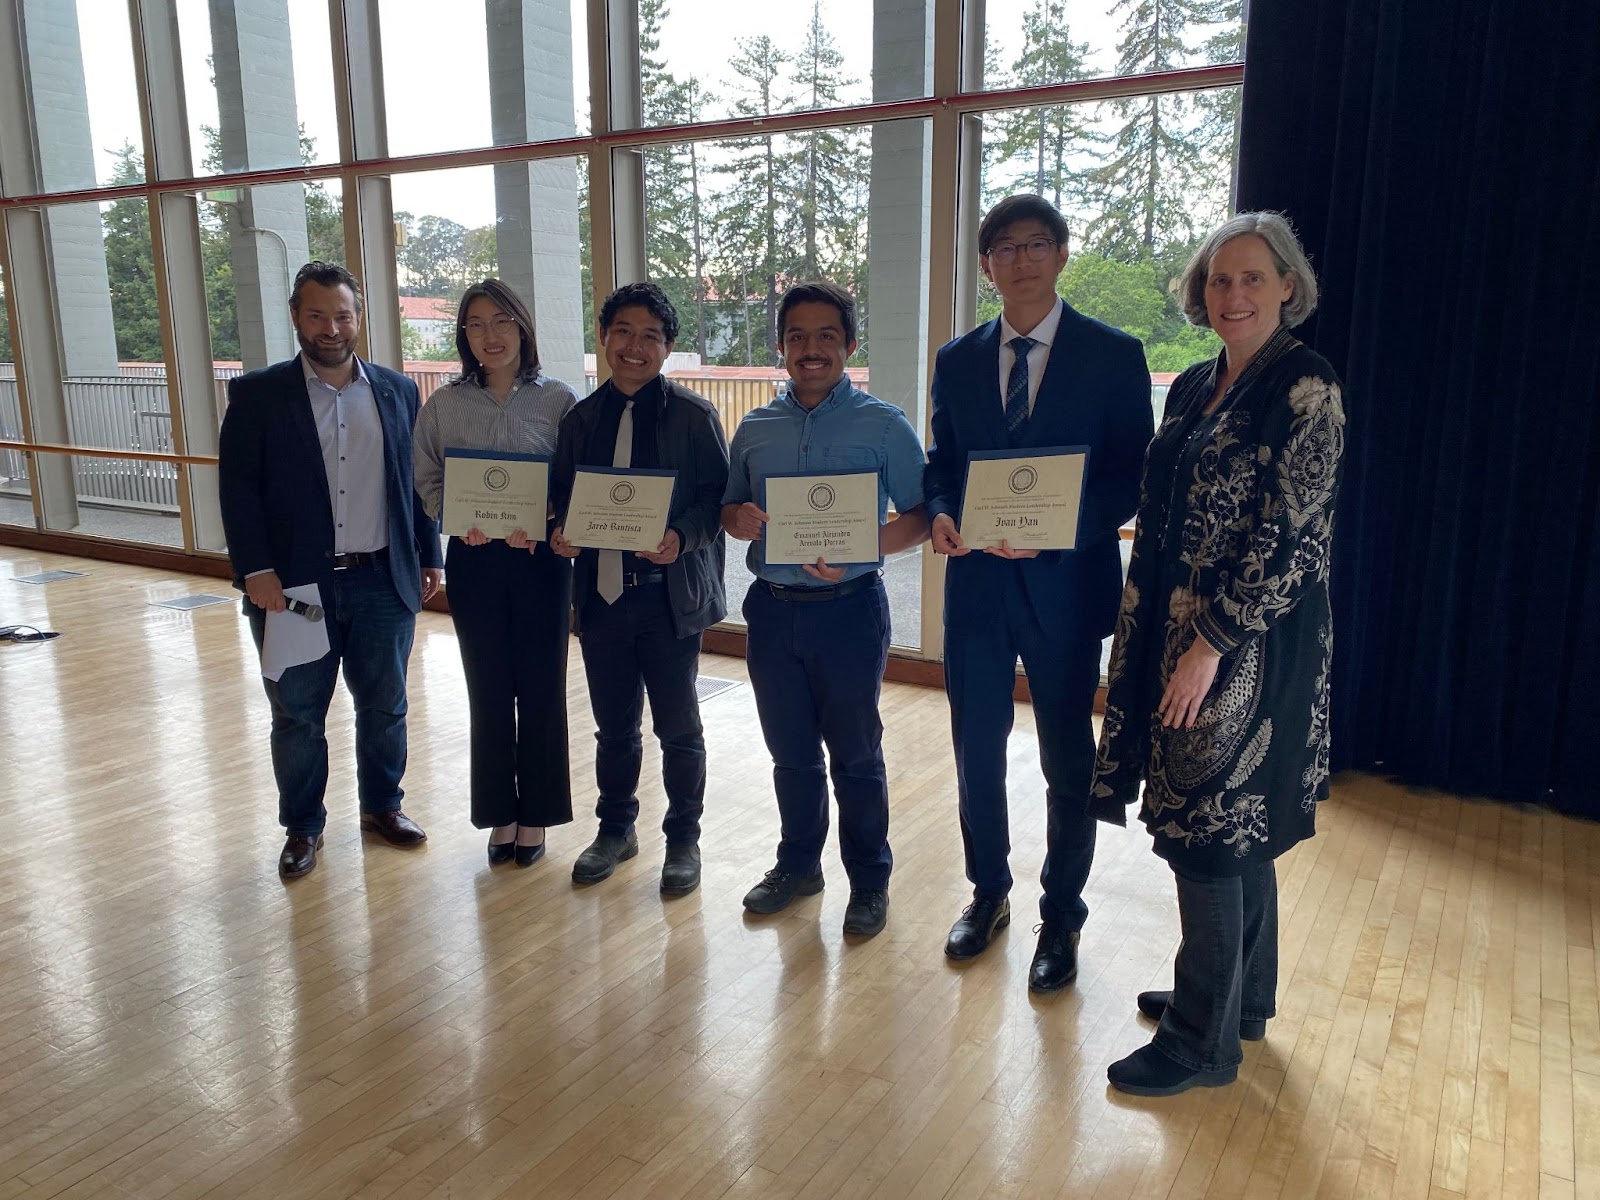 Chair Joan Walker (far right) and CEE Professor Dimitrios Konstantinidis (far left) present Robin Kim, Jared Bautista, Emanuel Arevalo Porras, and Ivan Yan (from left to right) with the Carl W. Johnson Student Leadership Award. (Photo Credit: Erin Leigh Inama).